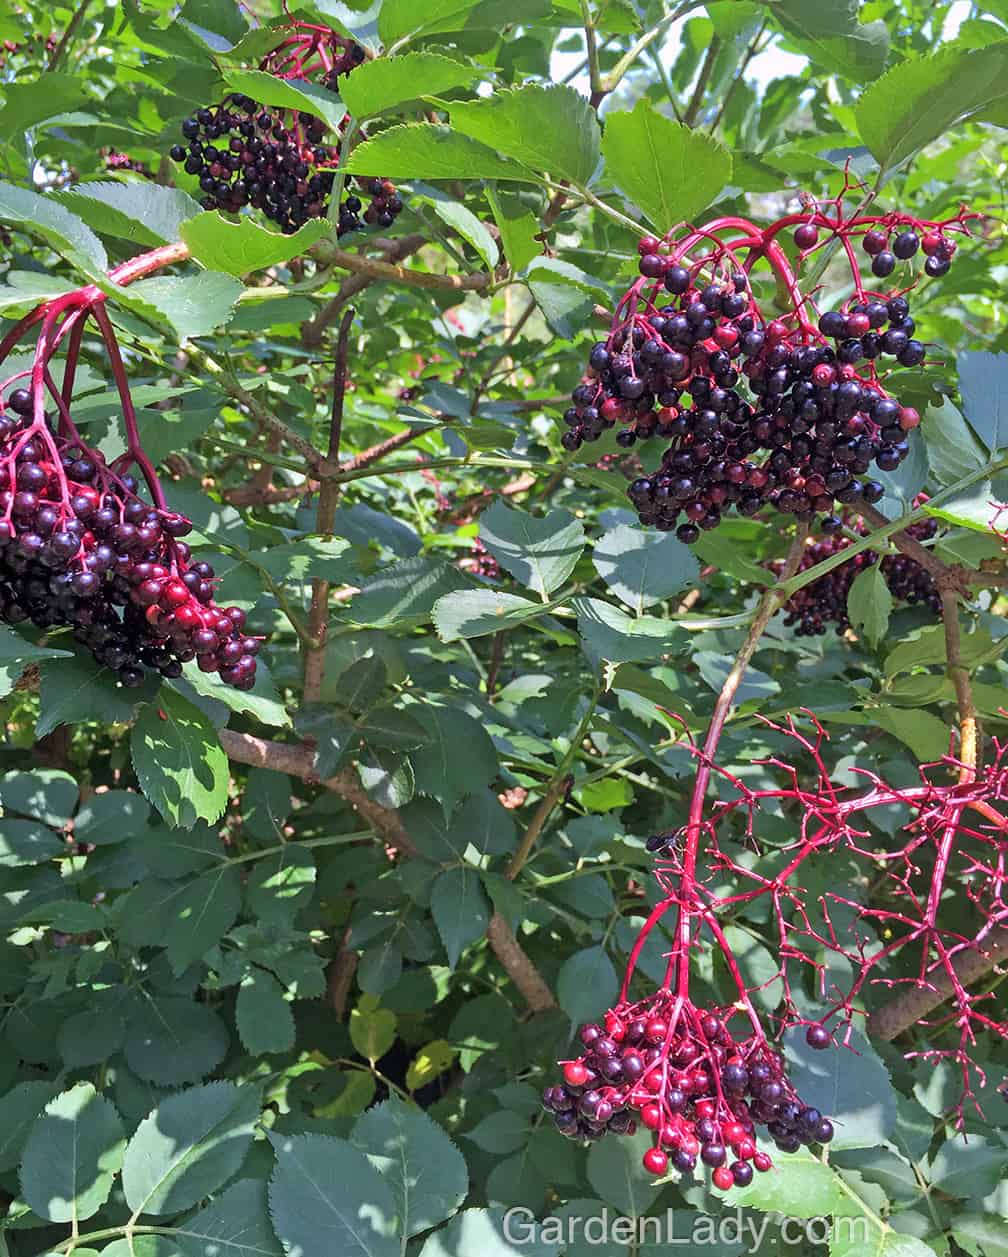 My Samdal Sambucus is filled with fruit this year. Too bad I don't make or eat jelly...